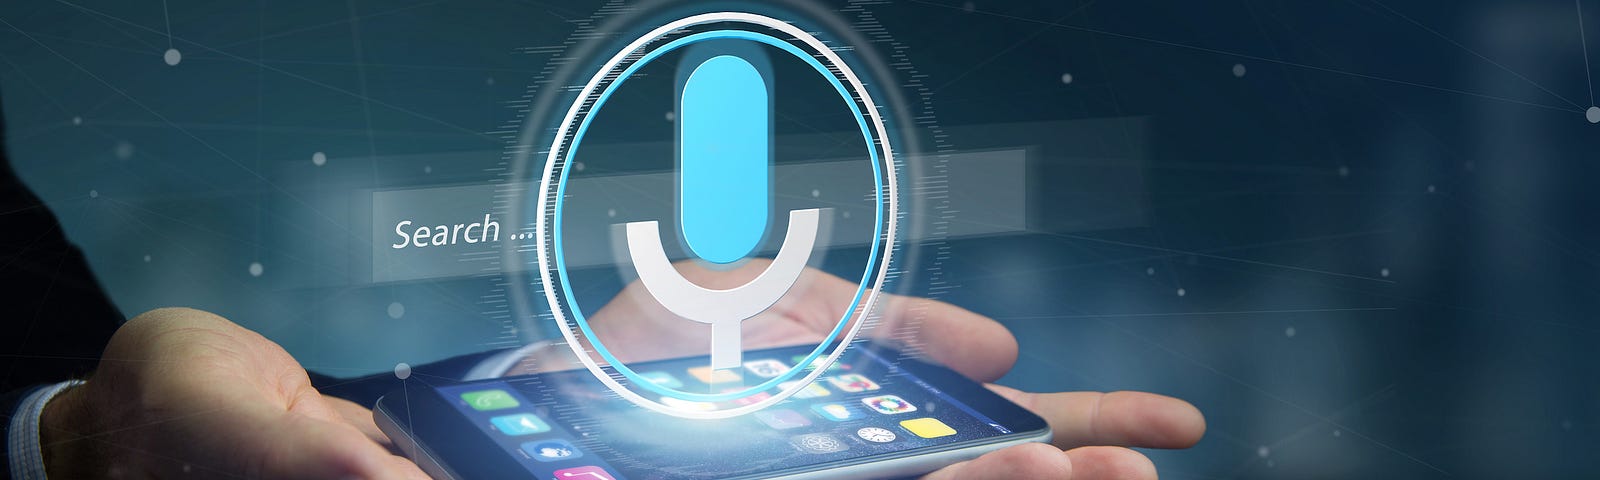 how to add speech recognition to your website